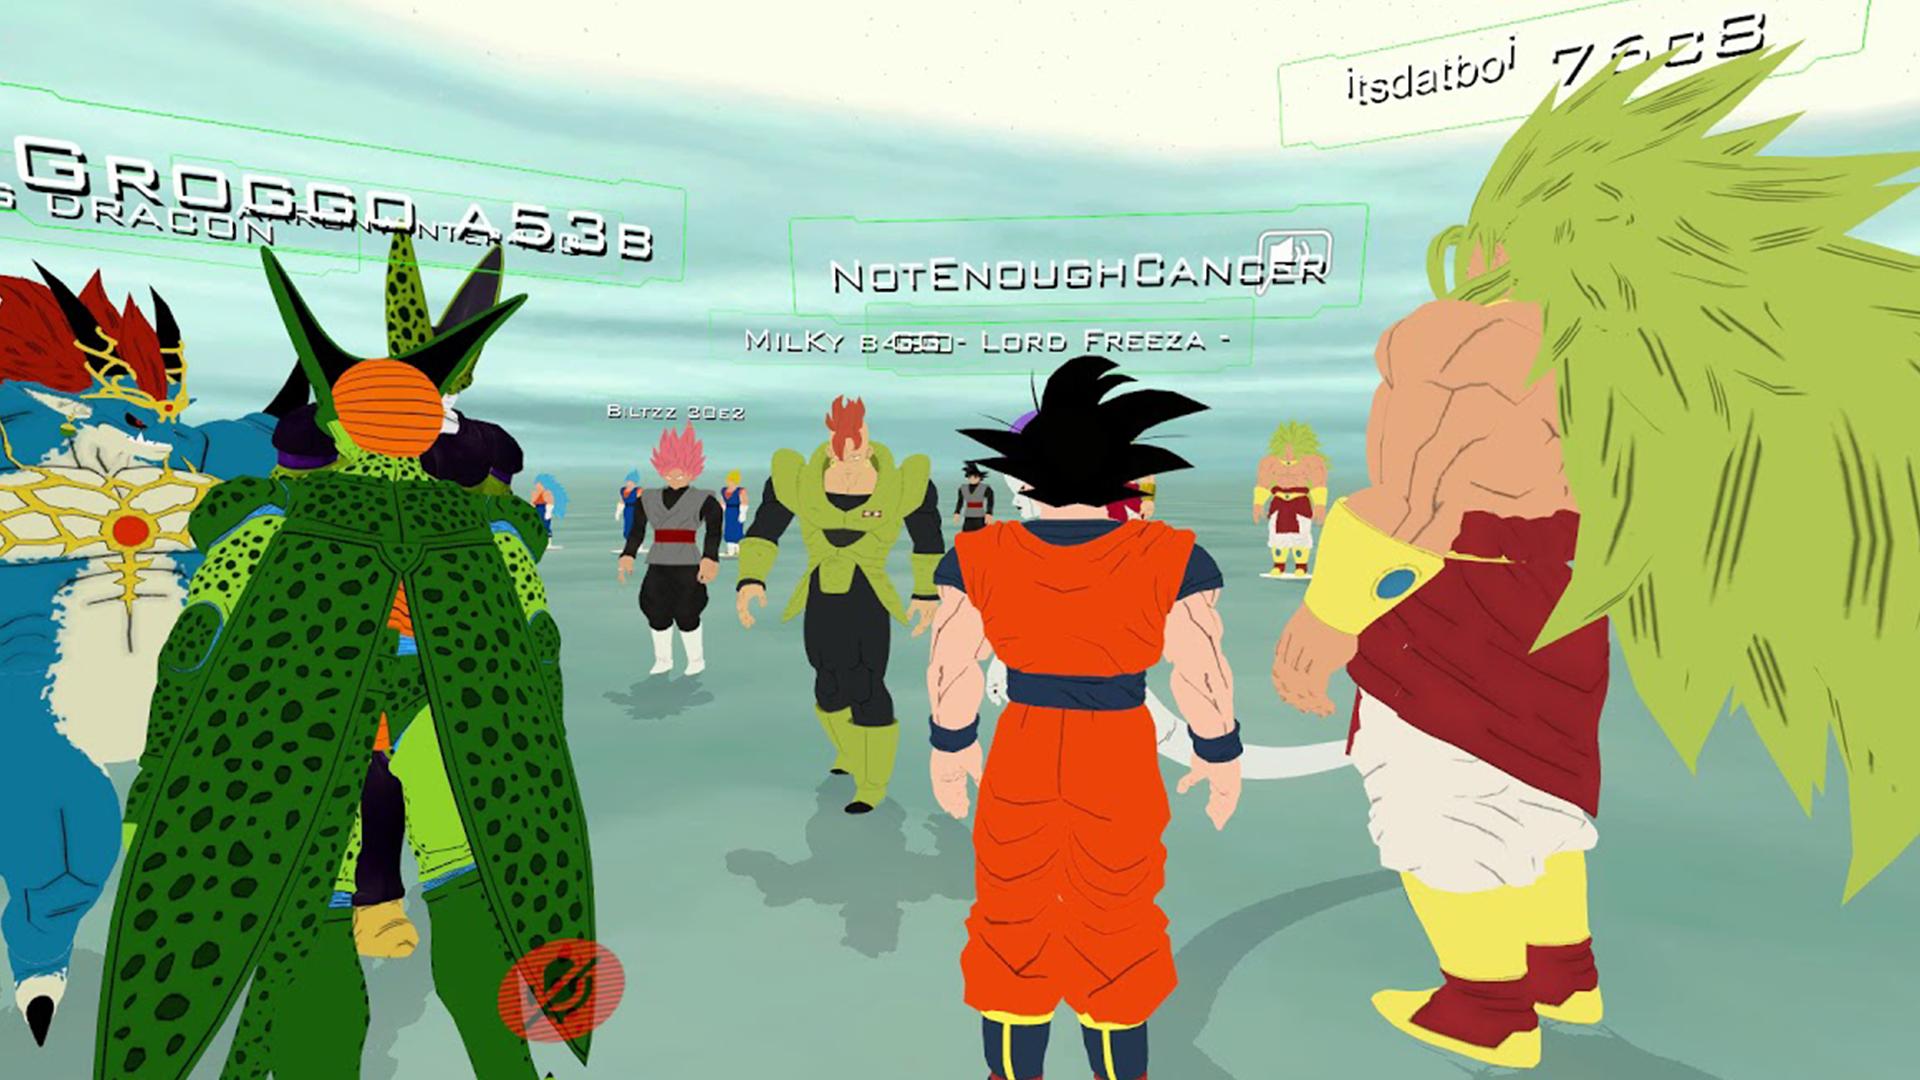 Vr Chat Game Dbz Avatars For Android Apk Download